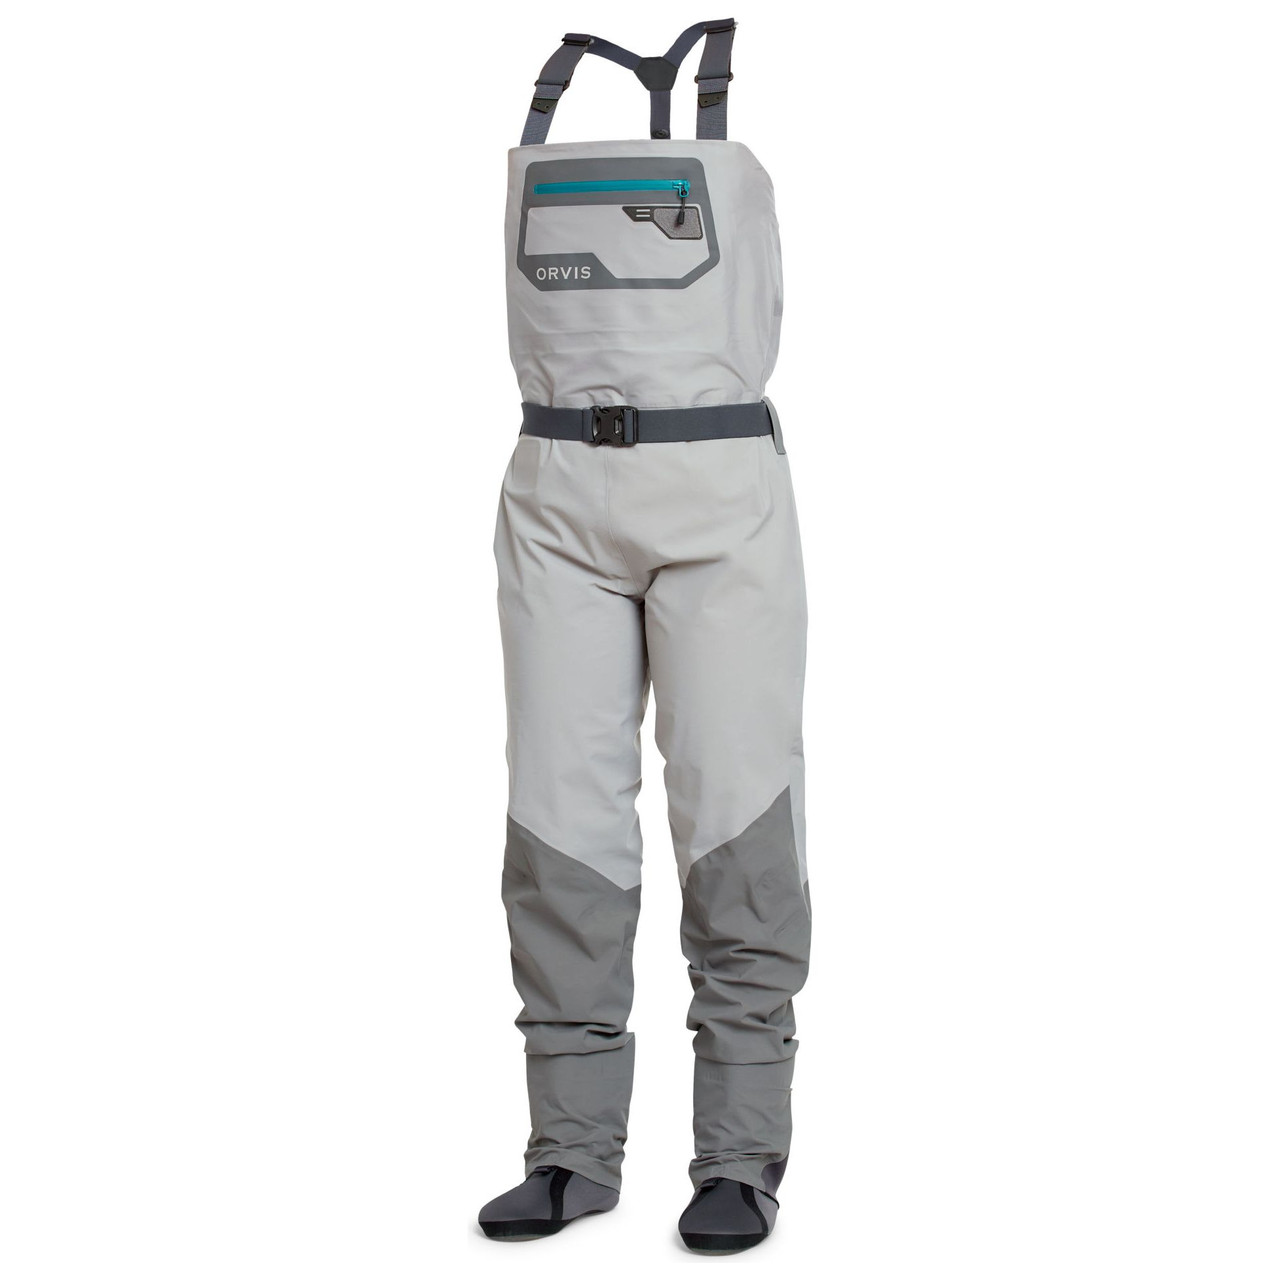 https://cdn11.bigcommerce.com/s-2vv8l4co0l/images/stencil/1280x1280/products/2786/16617/103066-orvis-womens-ultralight-convertible-wader-storm-01__04780.1645461718.jpg?c=2